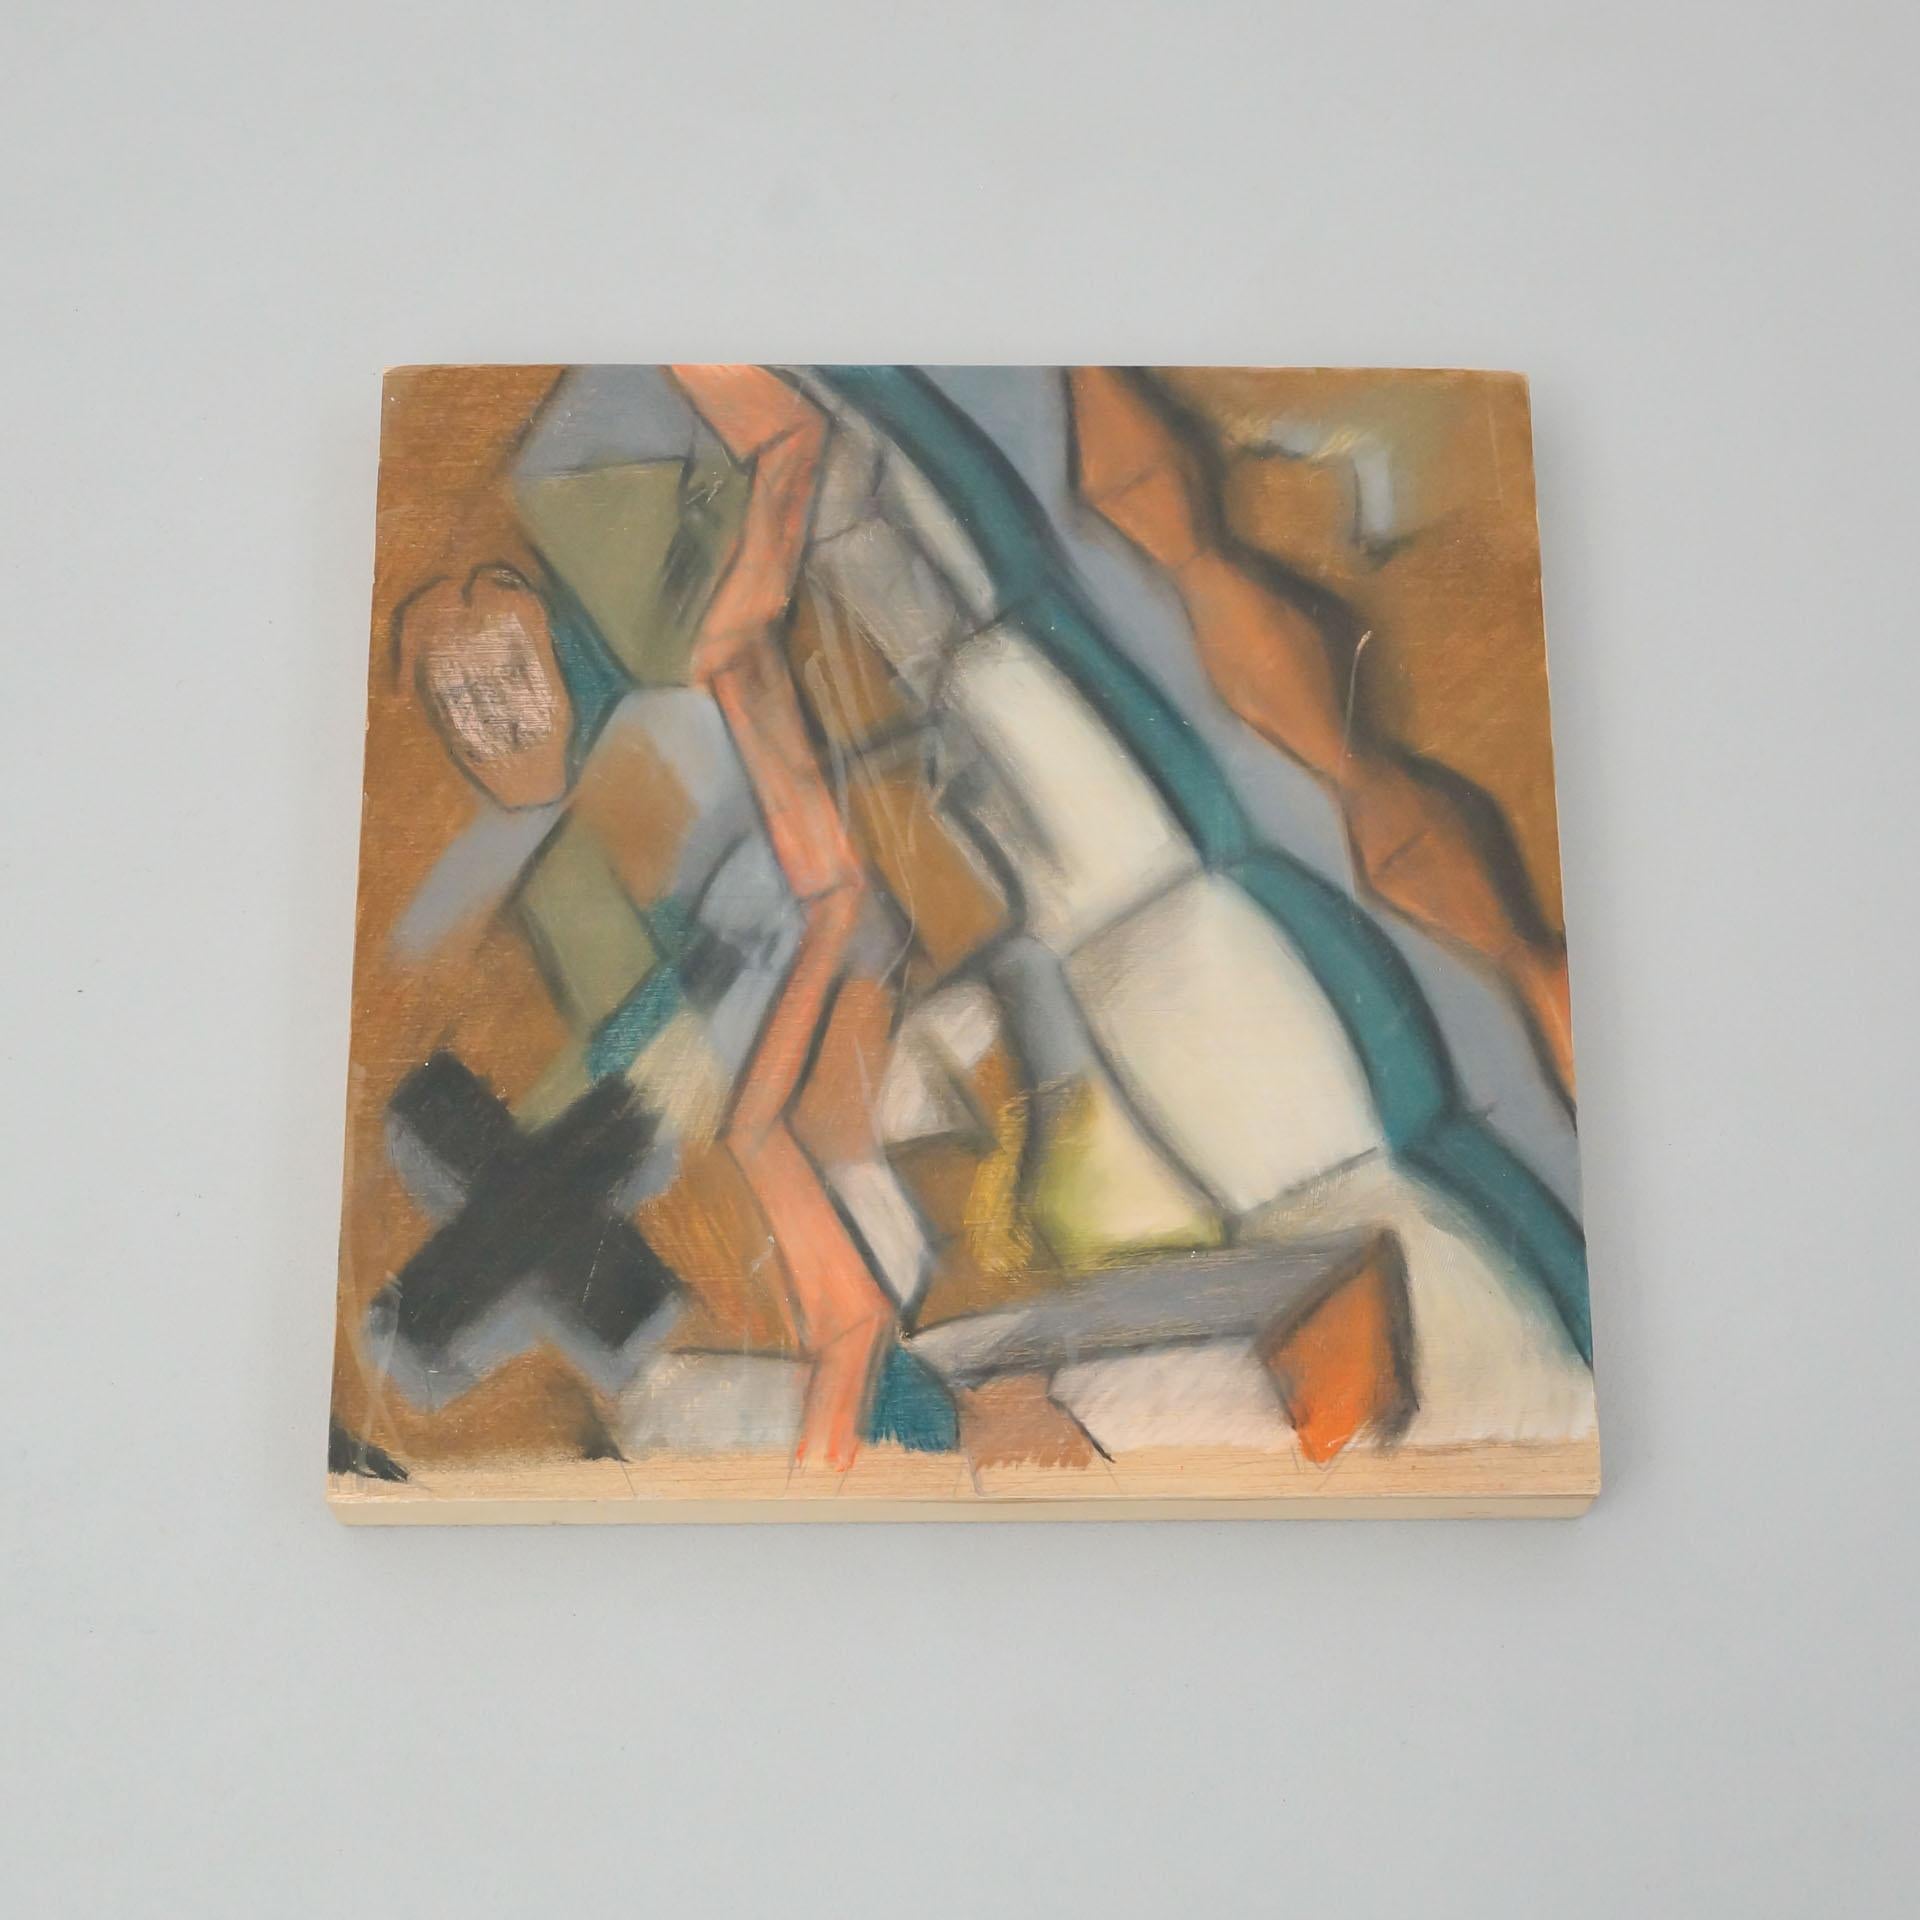 Contemporary abstract painting by Adrian, 2020
Mixed-media on wood.

Handsigned and dated on the back.

Materials:
Wood

Dimensions:
D 4 cm x W 40 cm x H 40 cm.